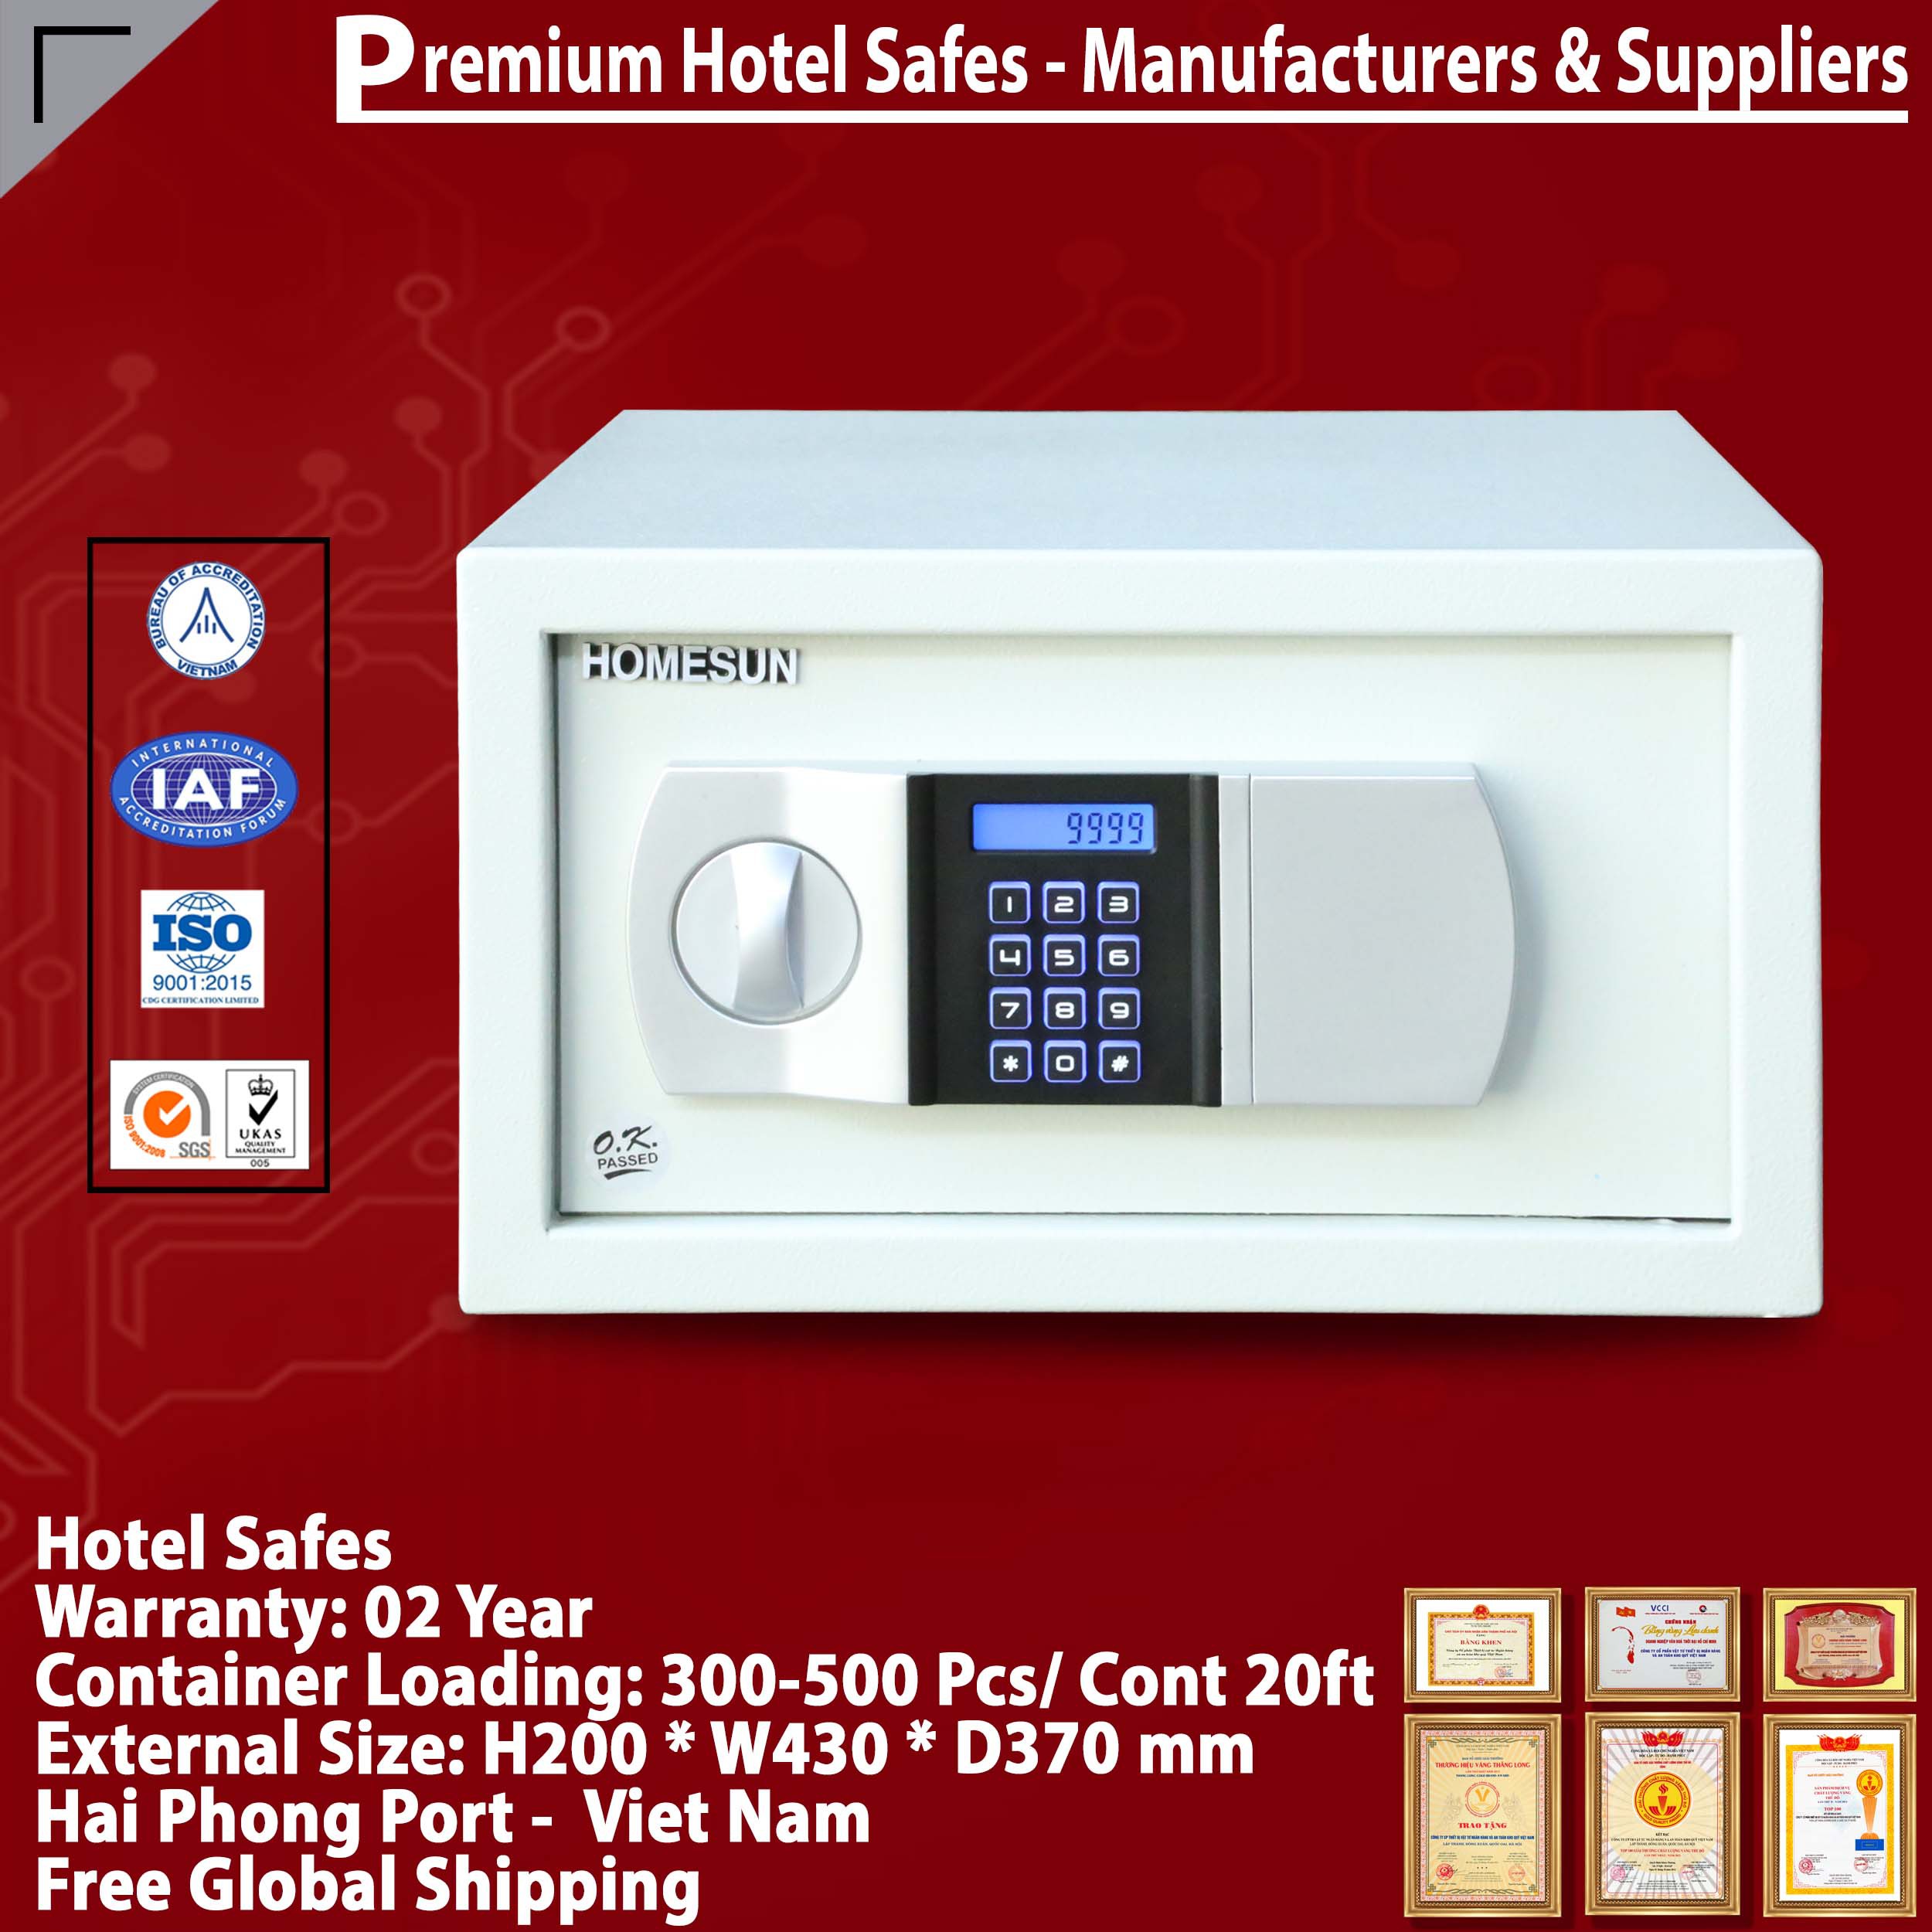 Hotel Safes Resort Factory Direct & Fast Shipping‎